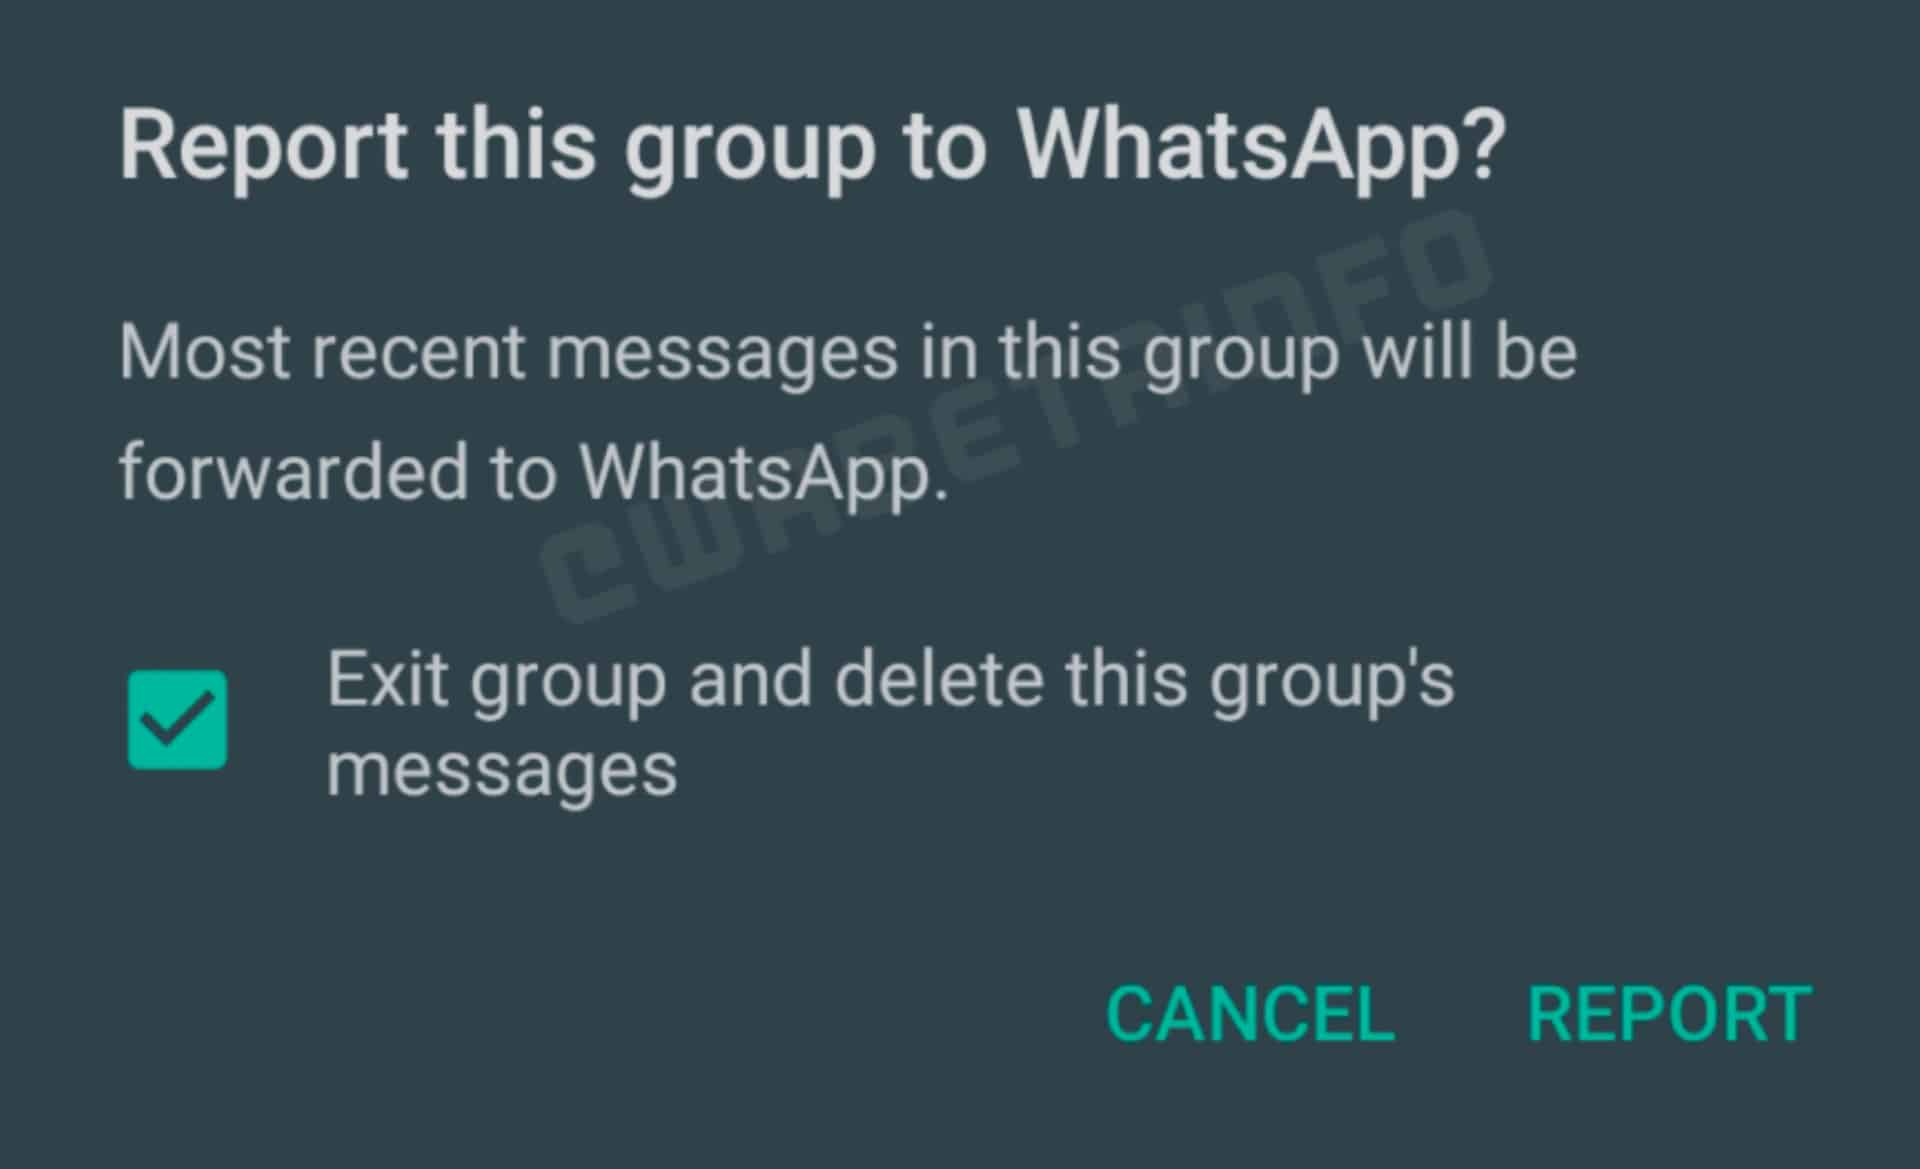 WhatsApp Beta Introduces a New Way to Verify Reported Chats, Rolls Out in a Beta Update